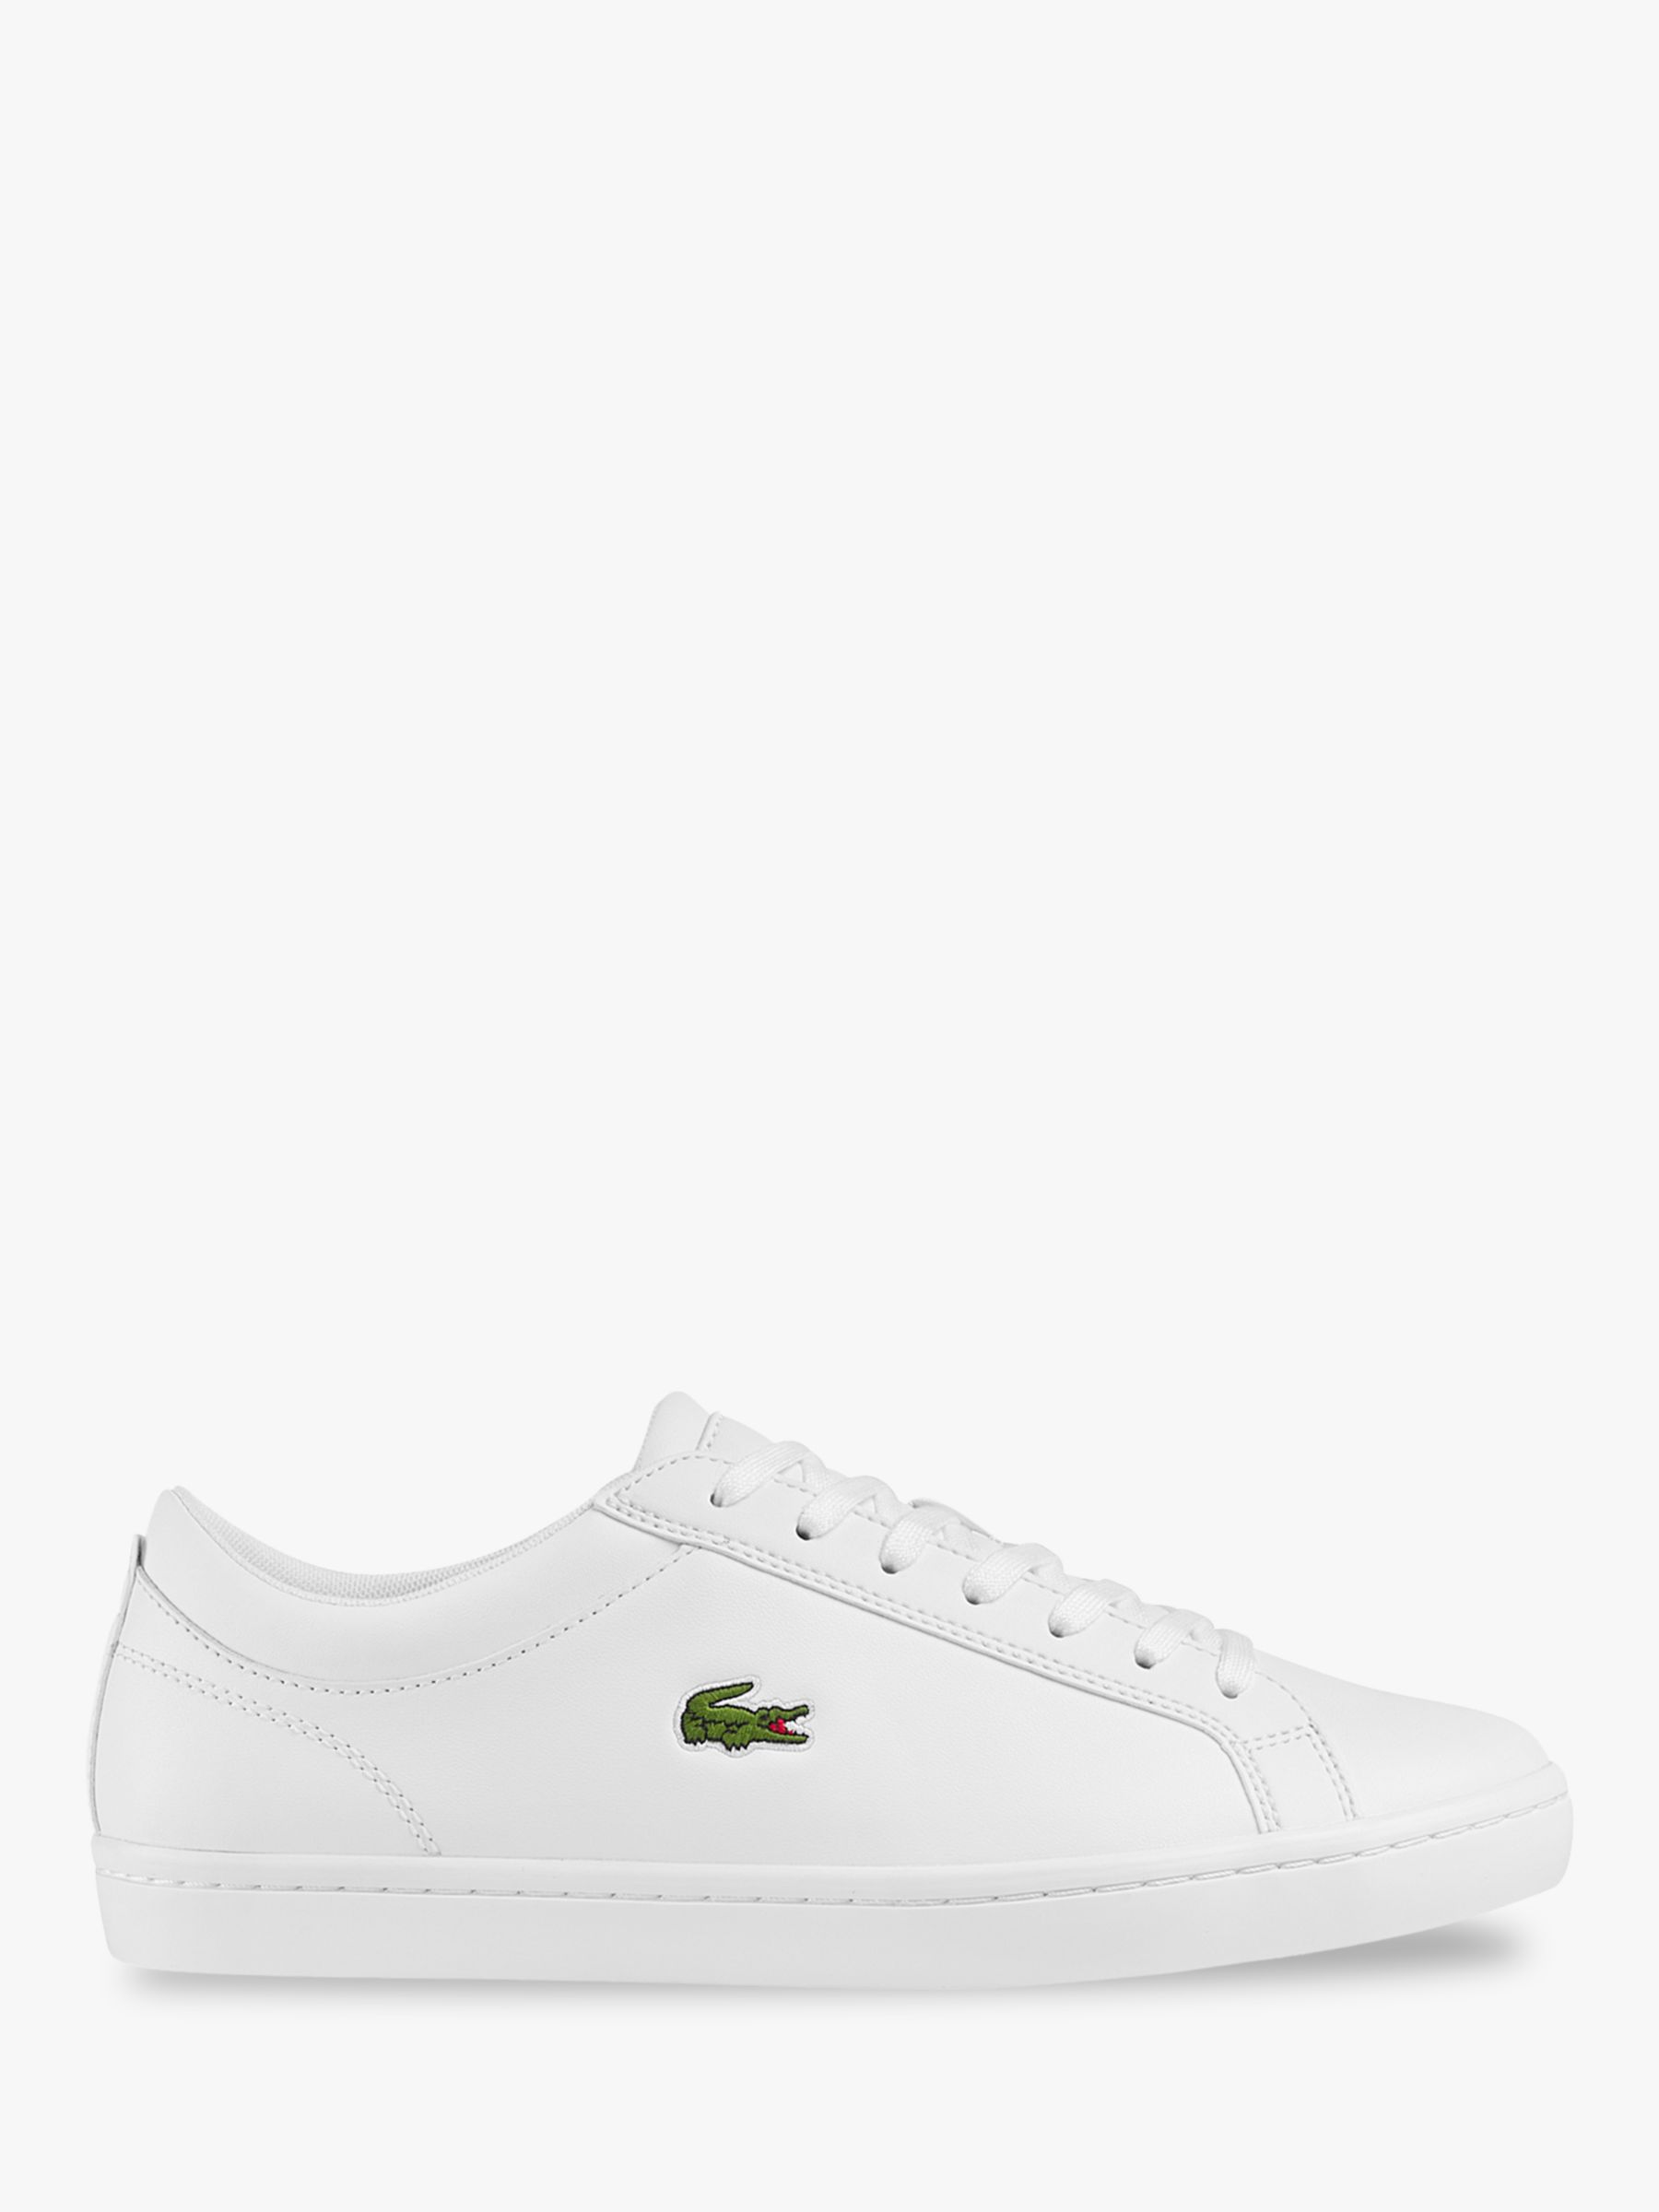 Lacoste Straightset Trainers, White at John Lewis & Partners